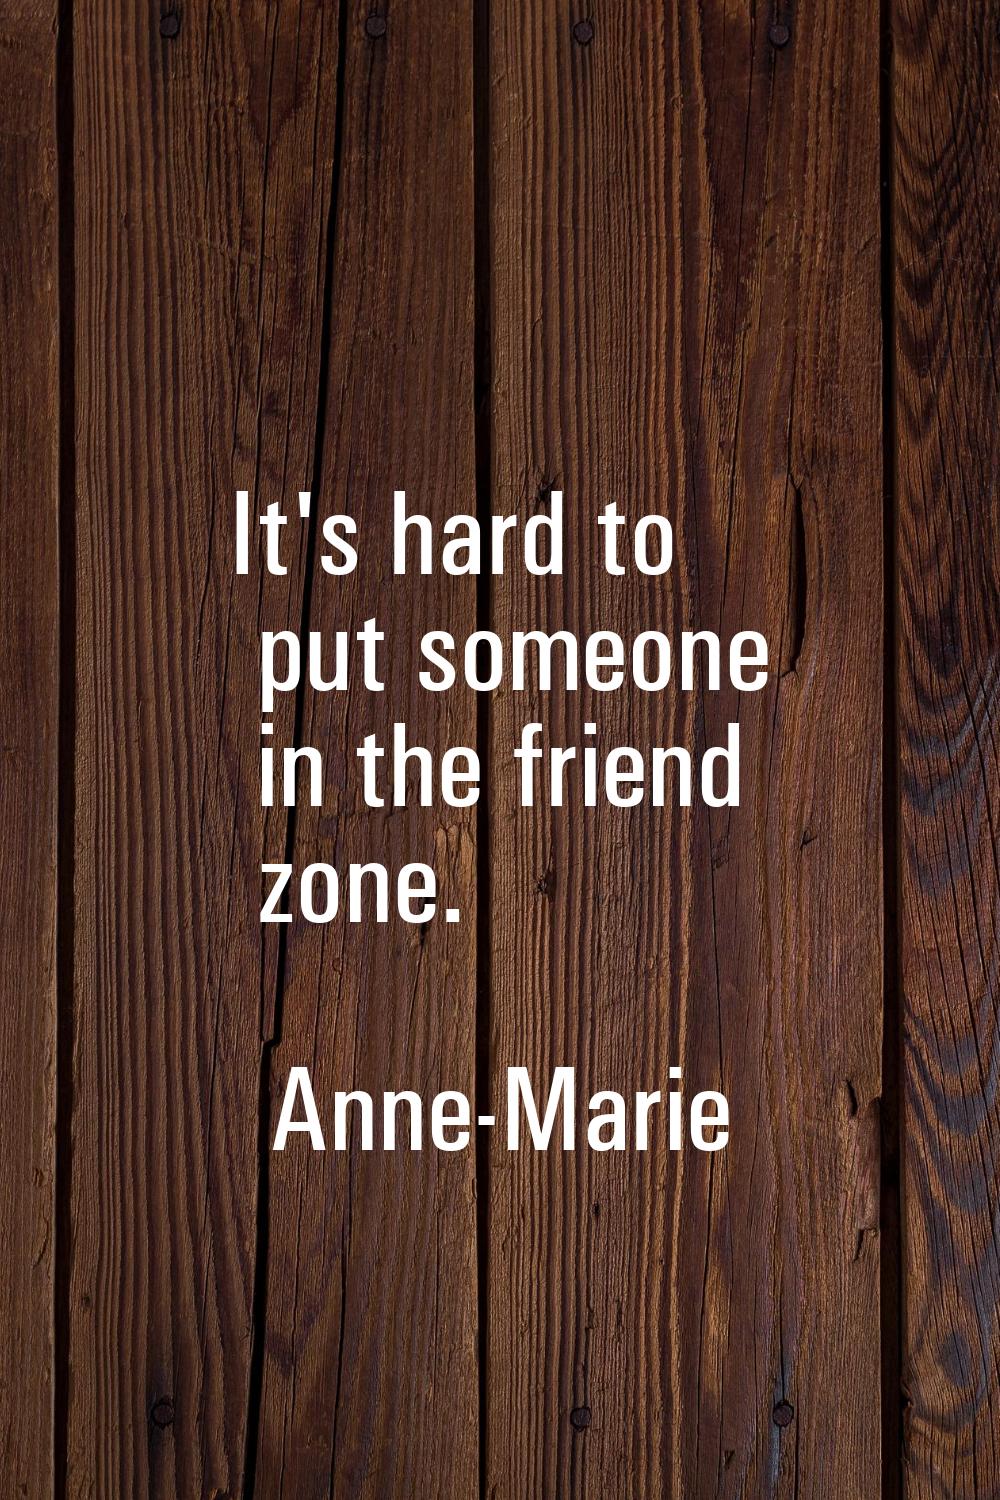 It's hard to put someone in the friend zone.